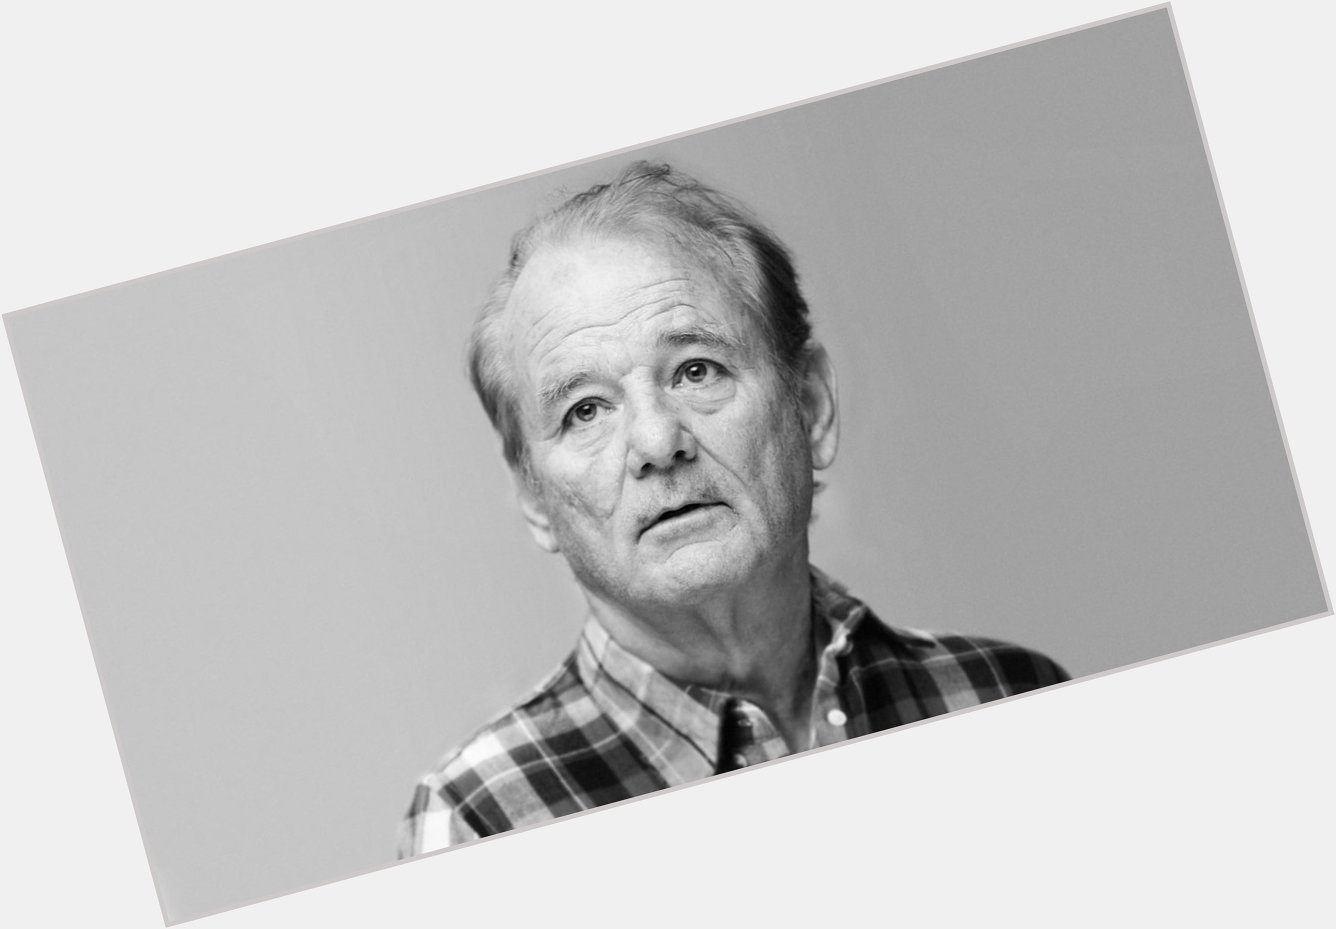 \"People say I\m difficult. Sometimes that\s a badge of honor.\" - Bill Murray

Happy Birthday! 